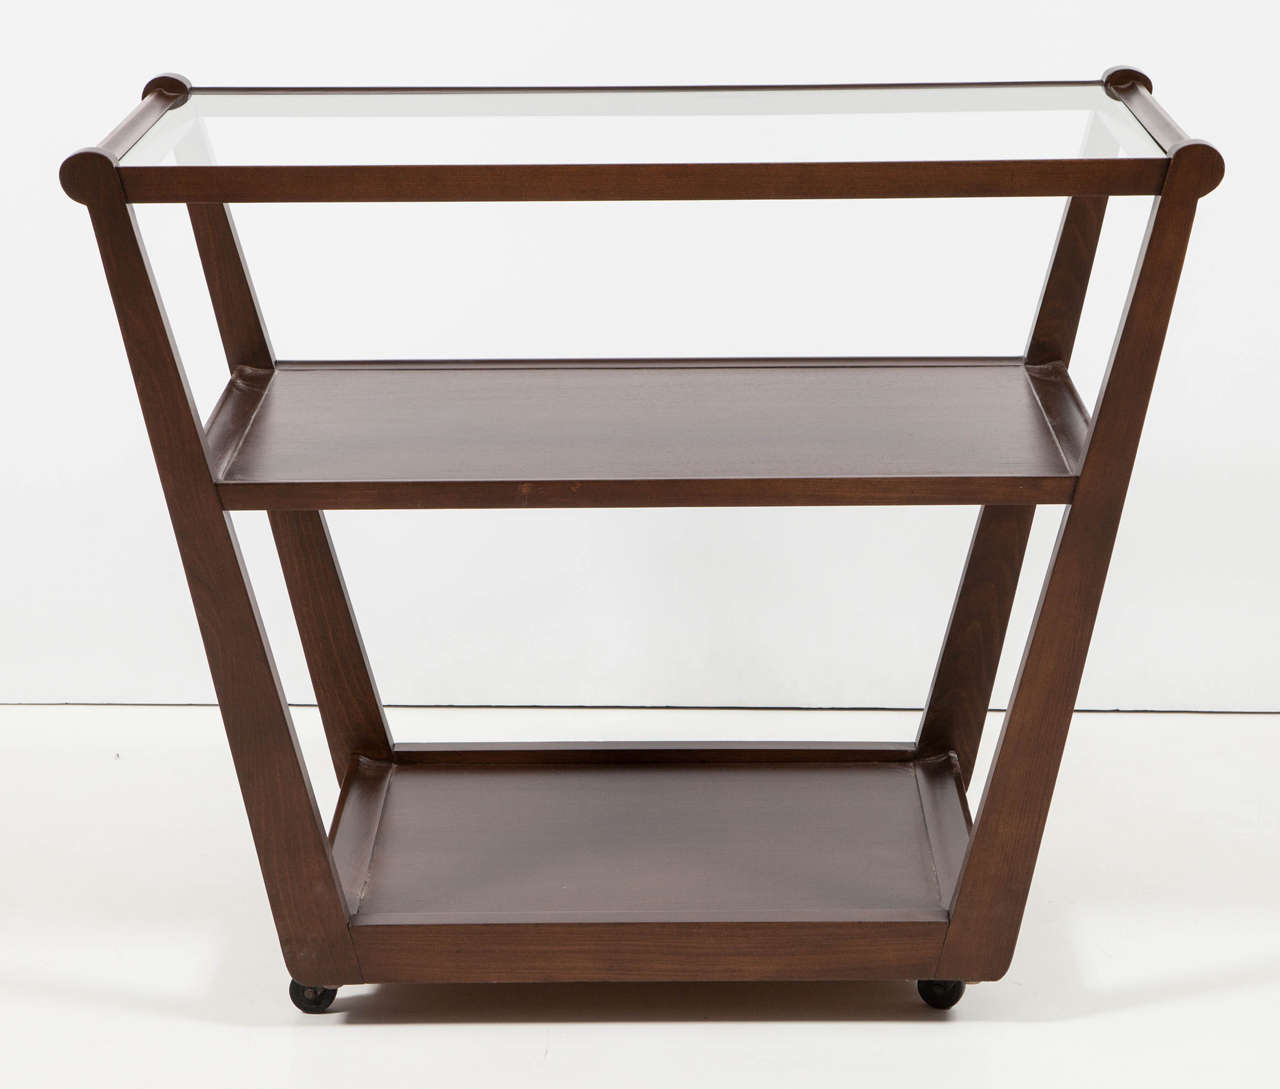 Sculptured trapezoidal three-tier serving cart in medium walnut finish by Edward Wormley for Drexel. Newly refinished to original specification.